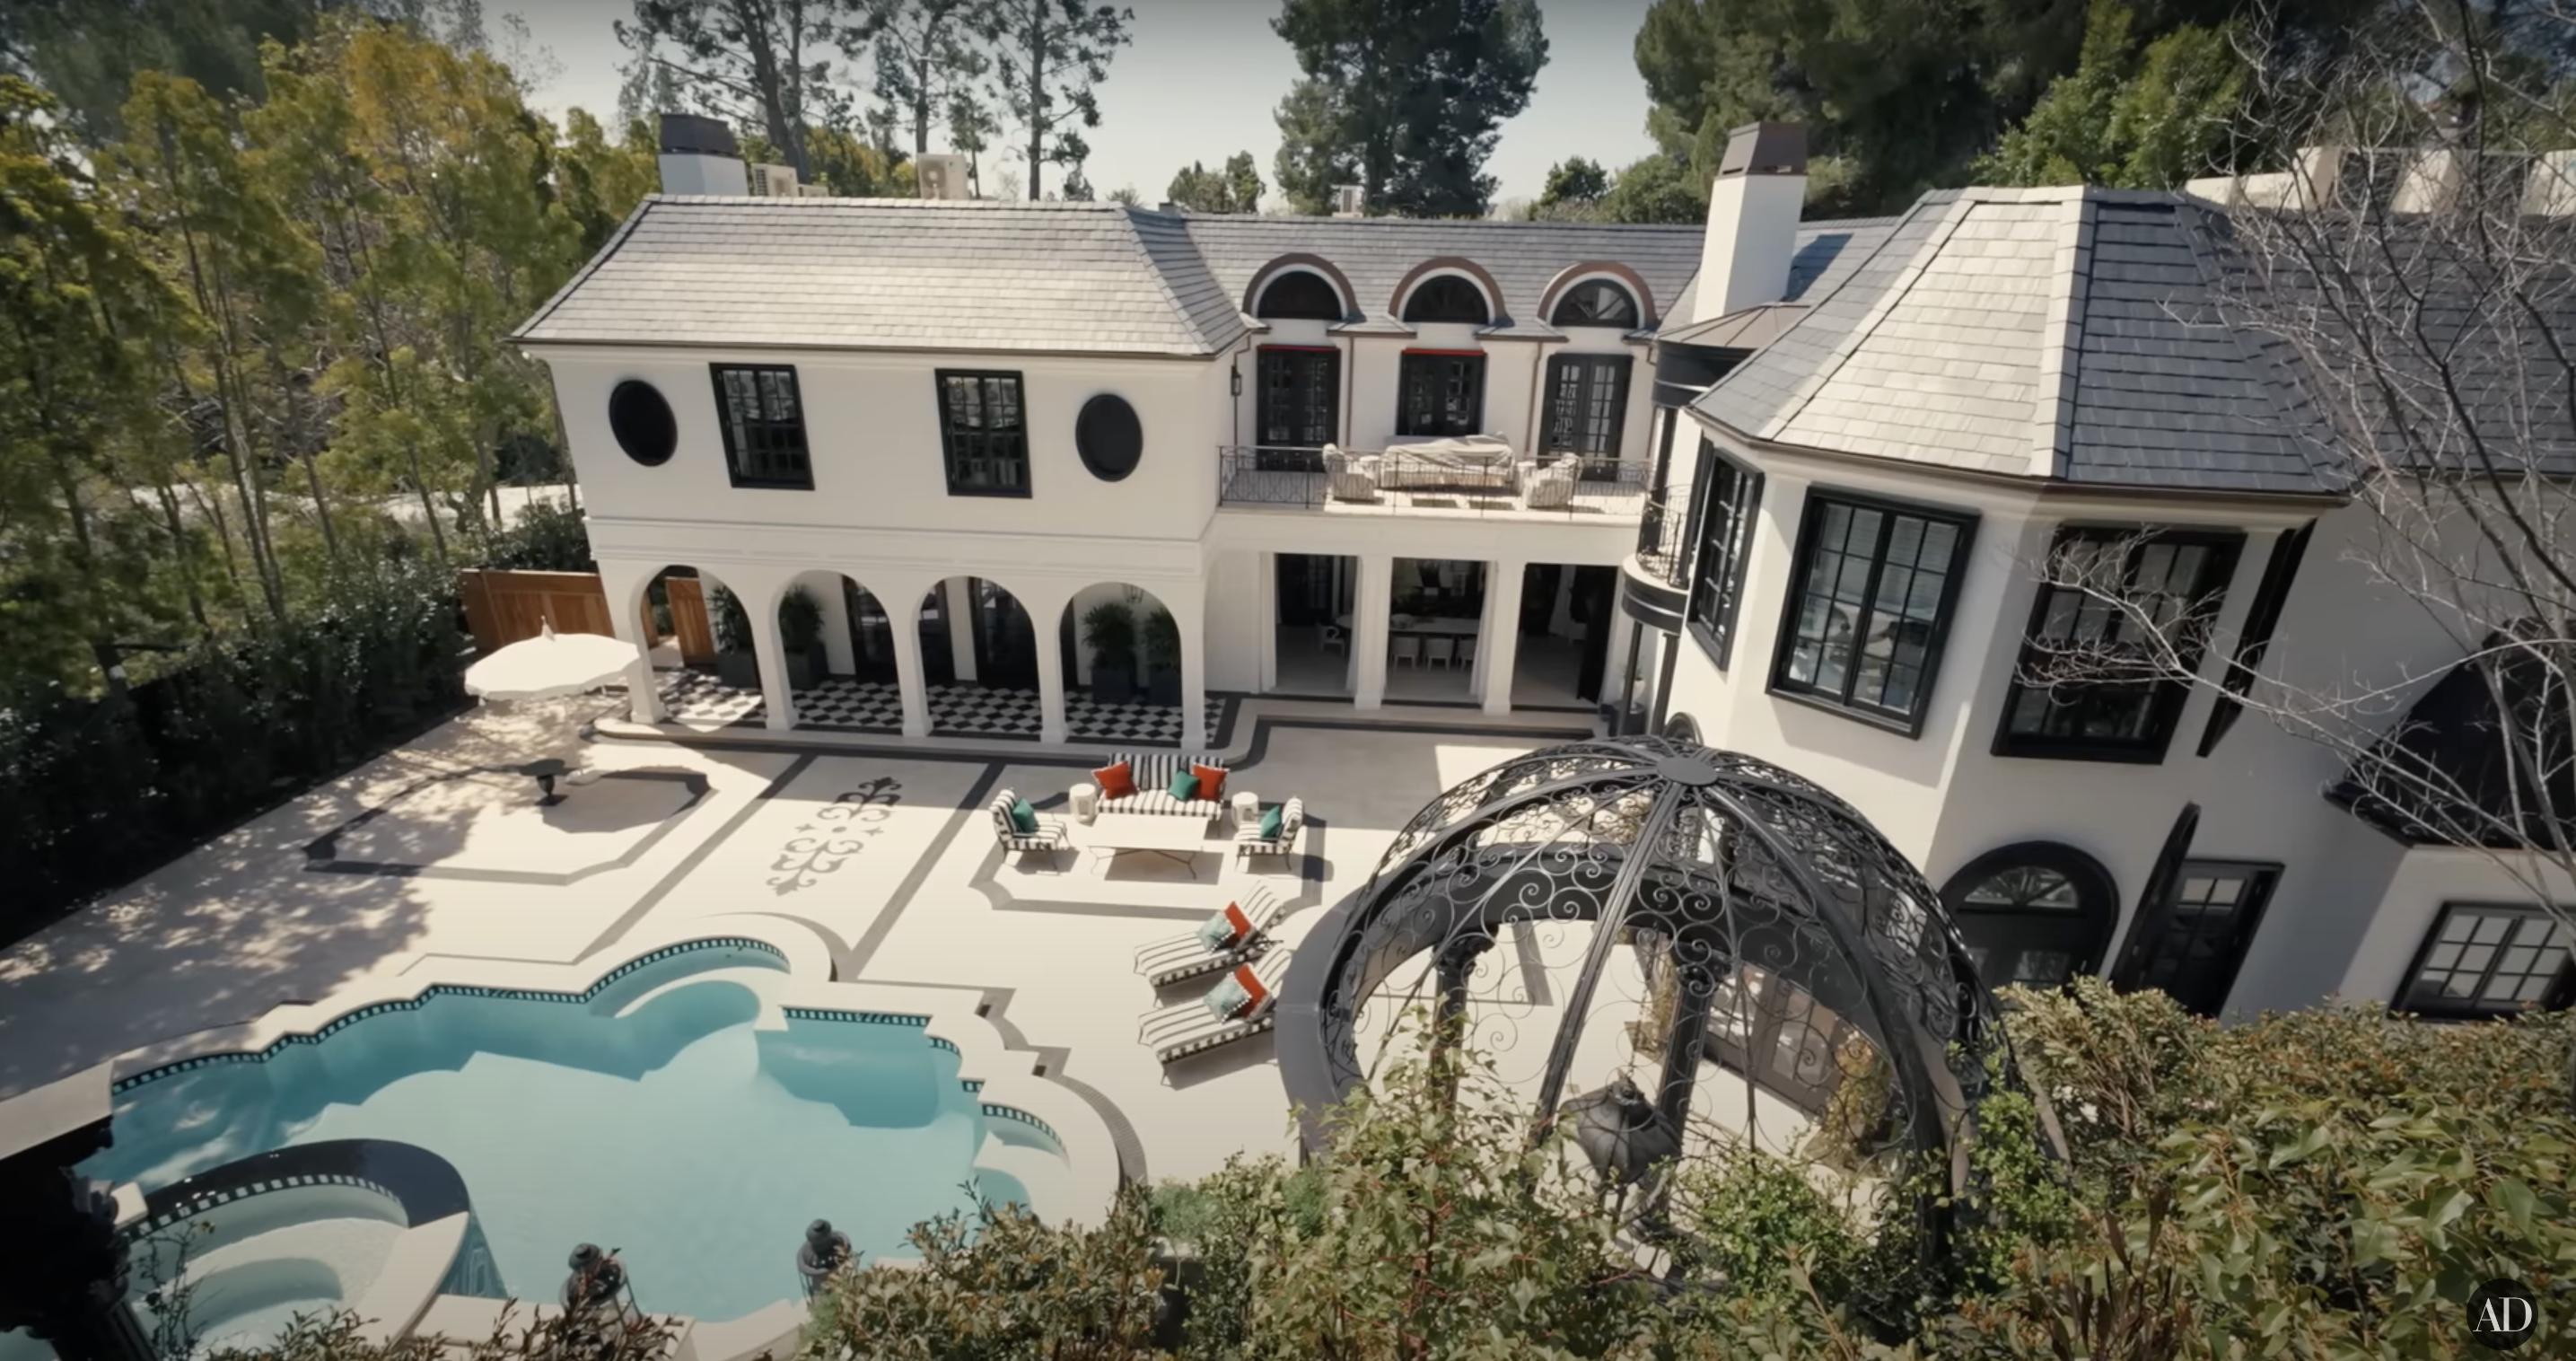 RuPaul and Georges LeBar's palatial home in Beverly Hills | Source: https://www.youtube.com/@Archdigest